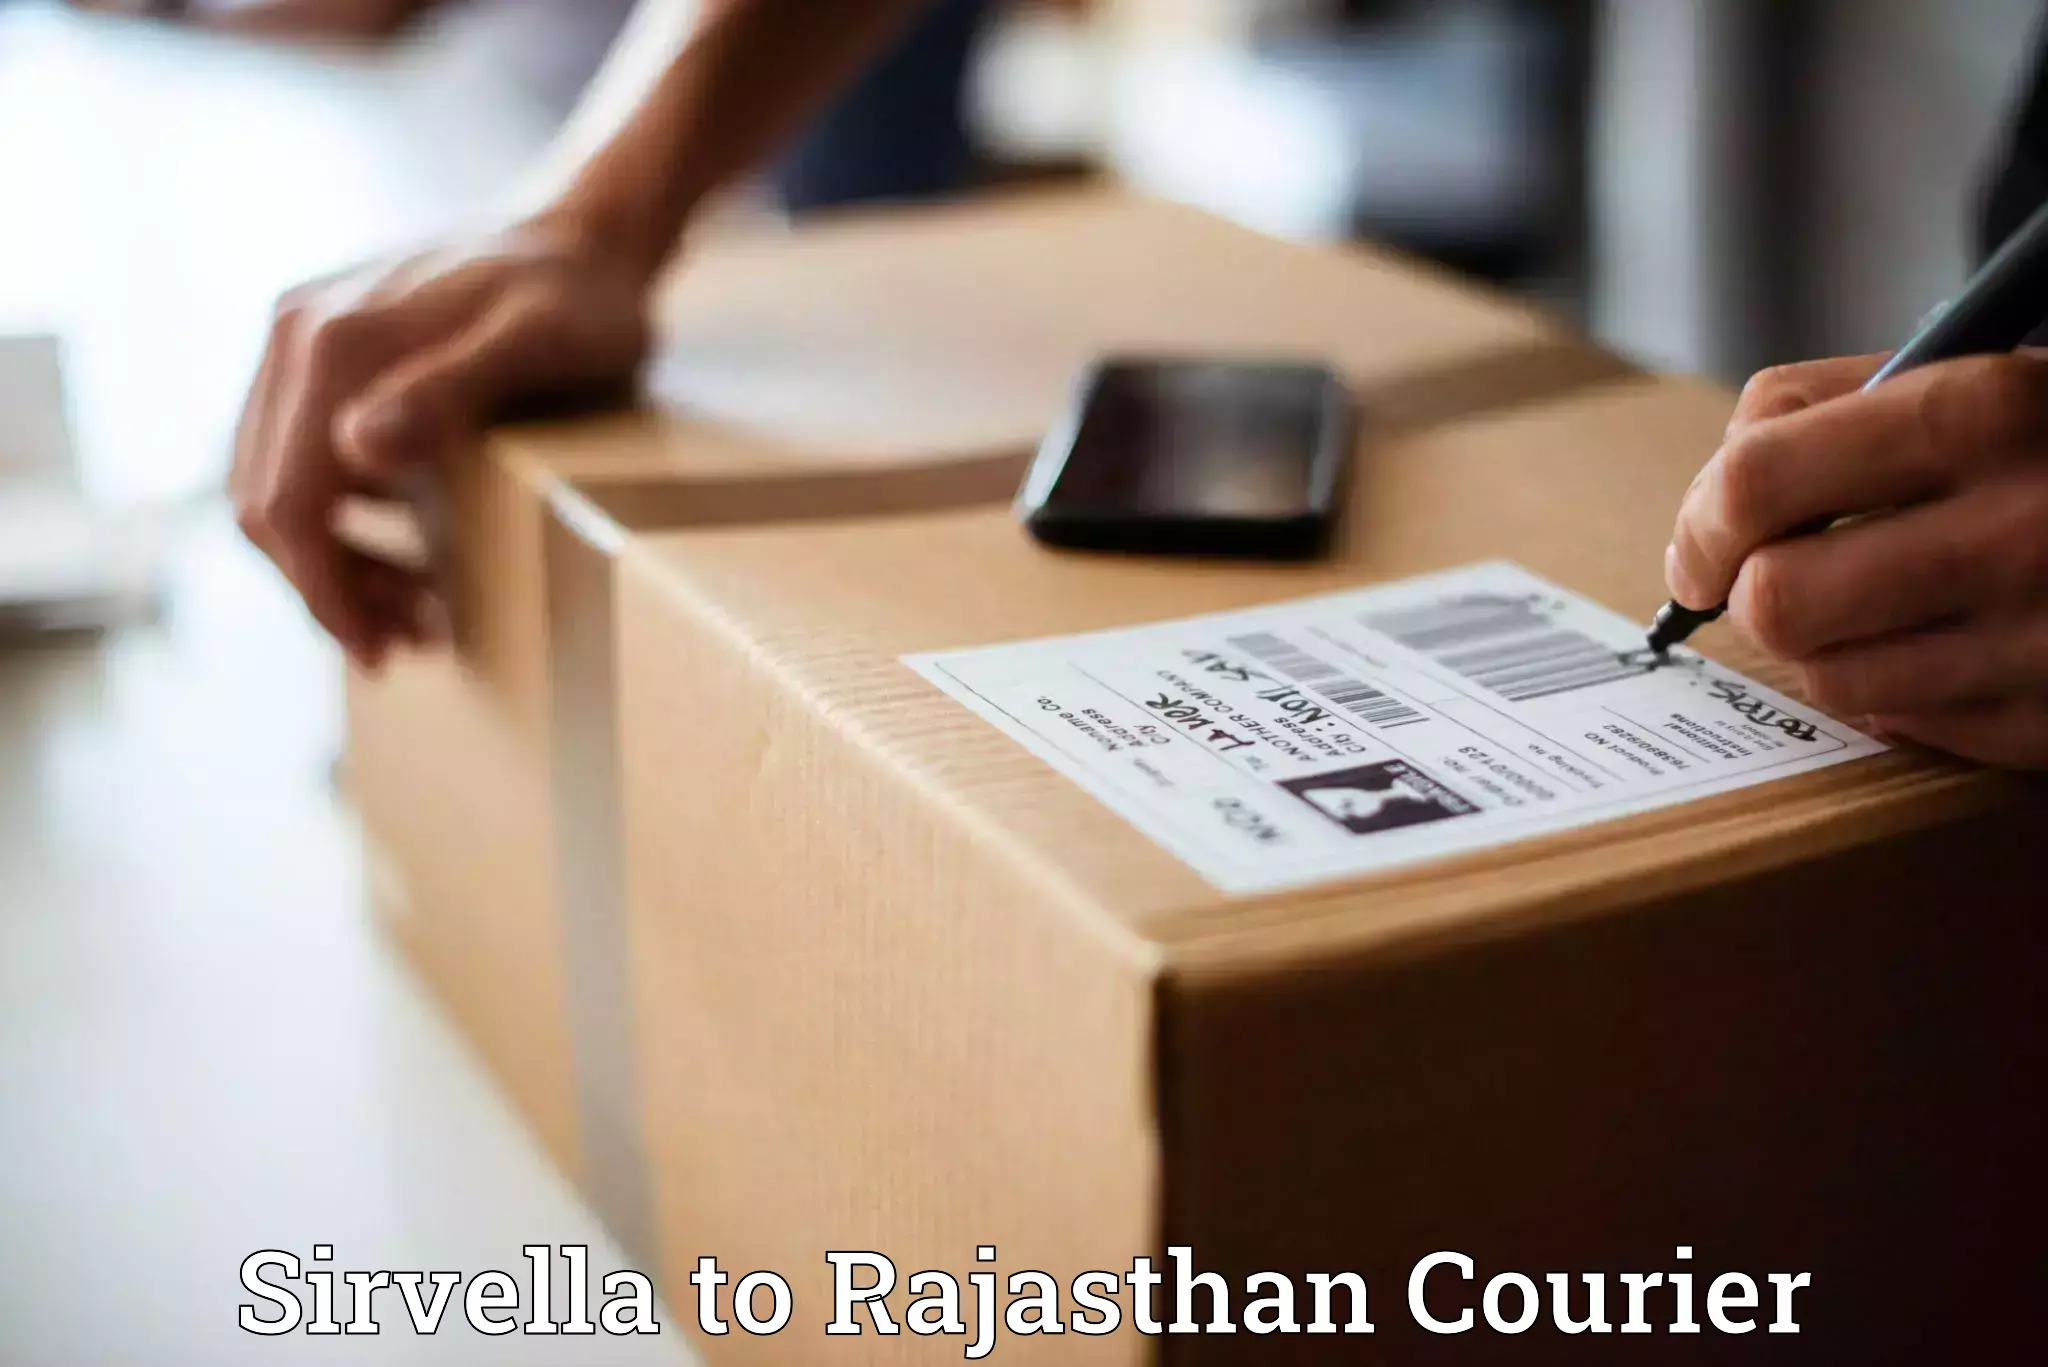 Efficient order fulfillment Sirvella to Rajasthan